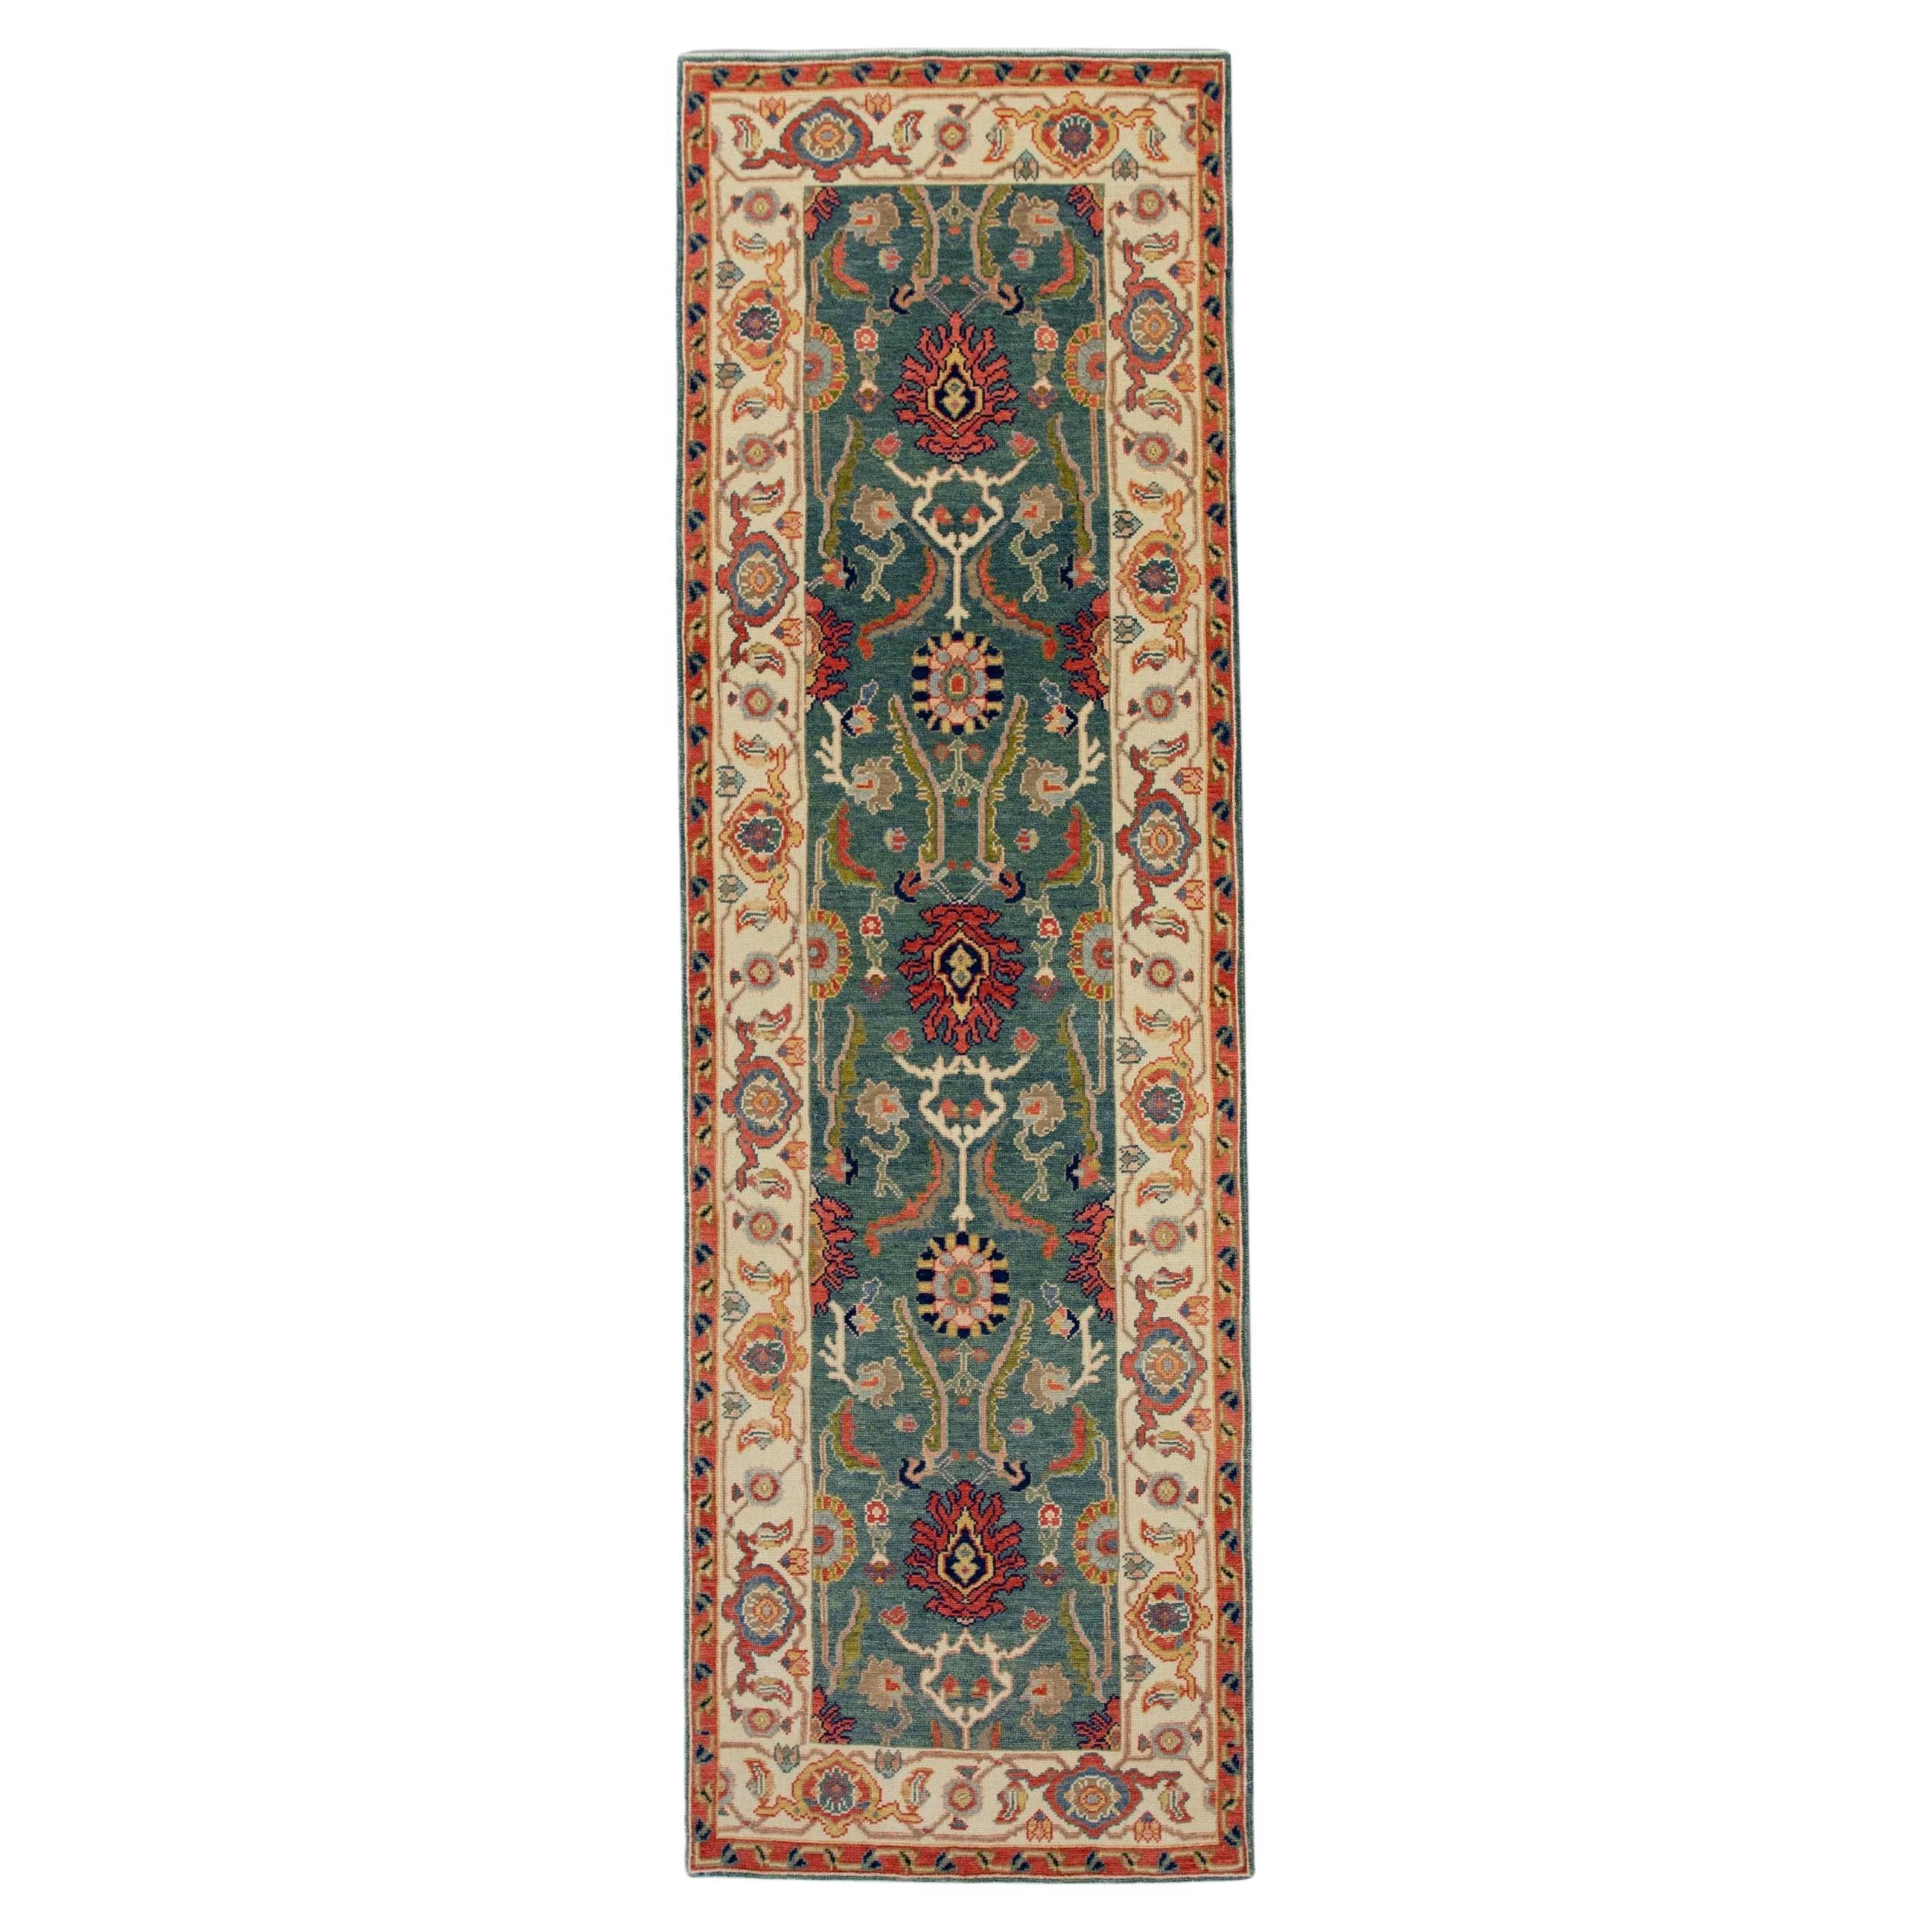 Cream, Green, and Red Floral Turkish Finewoven Wool Oushak Rug 2'7" x 8'5" For Sale